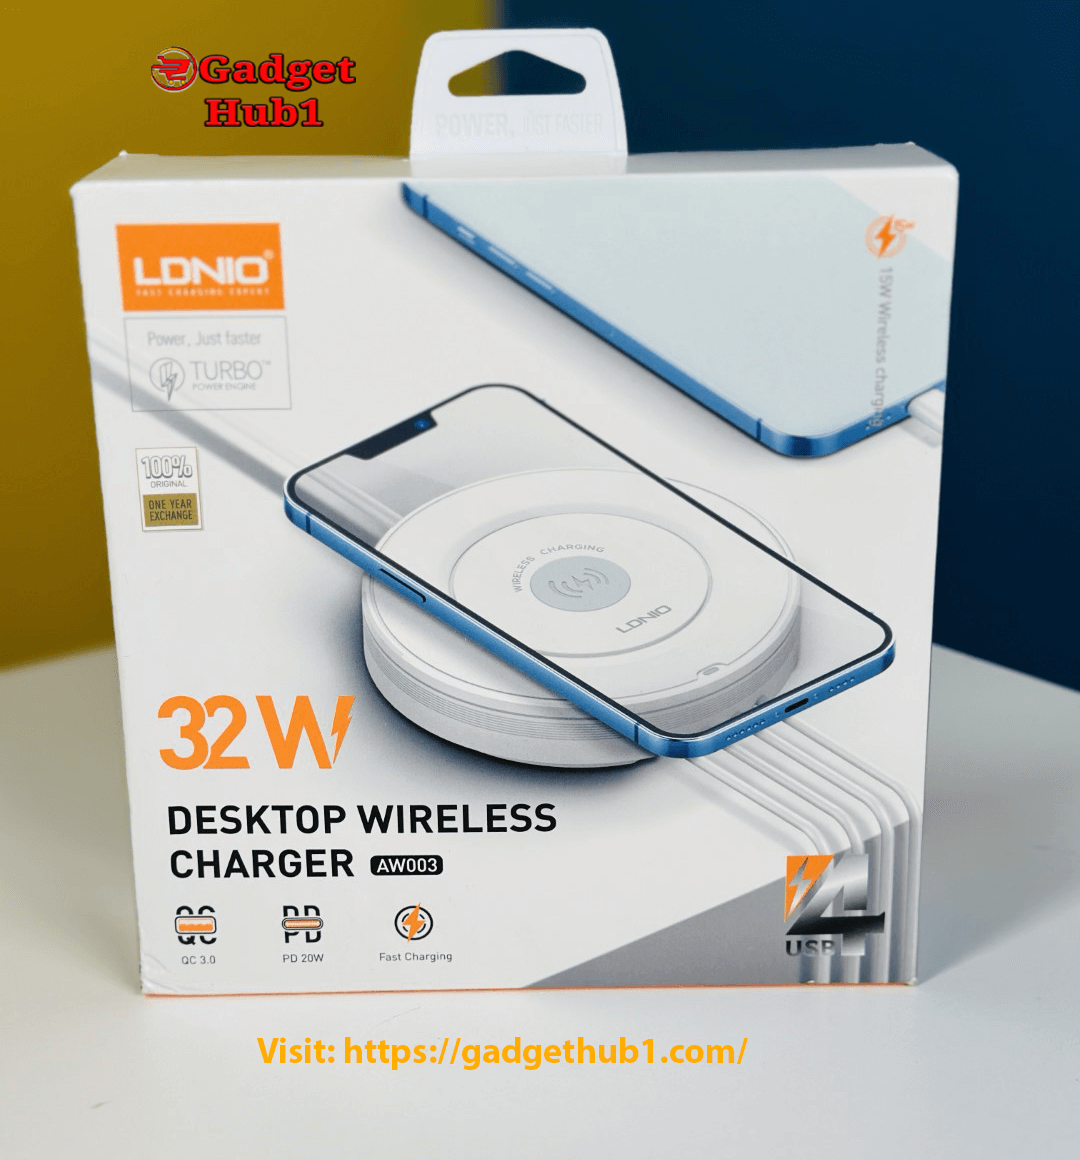 LDNIO AW003 4-Port Fast Charger with 32W Wireless Charging, including 1 PD, 1 QC3.0, and 2 USB-A Ports